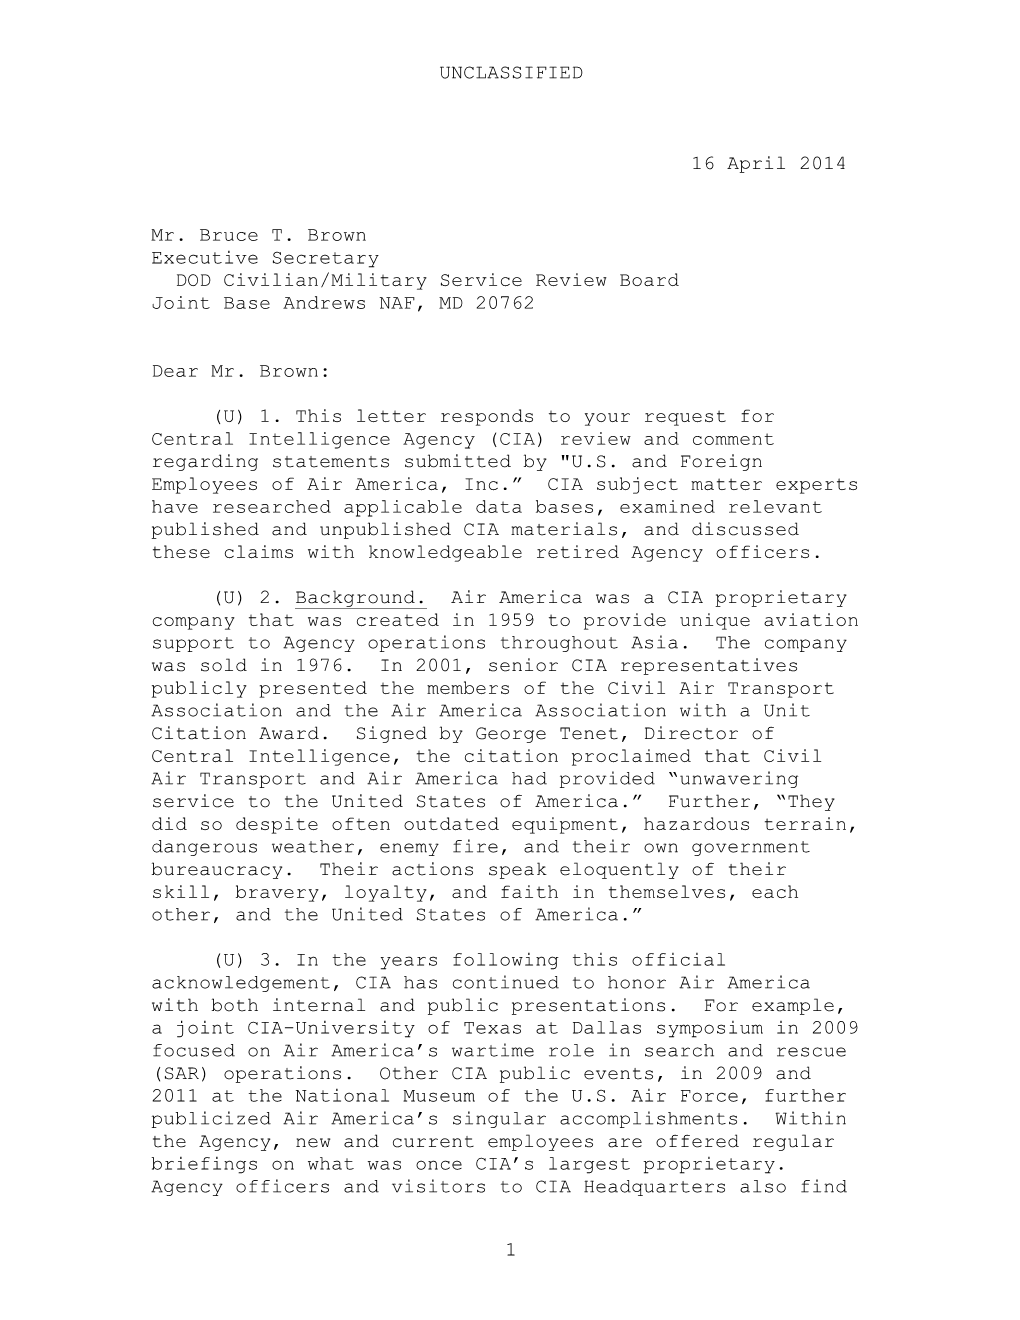 Letter from David Robarge Dated April 16, 2014